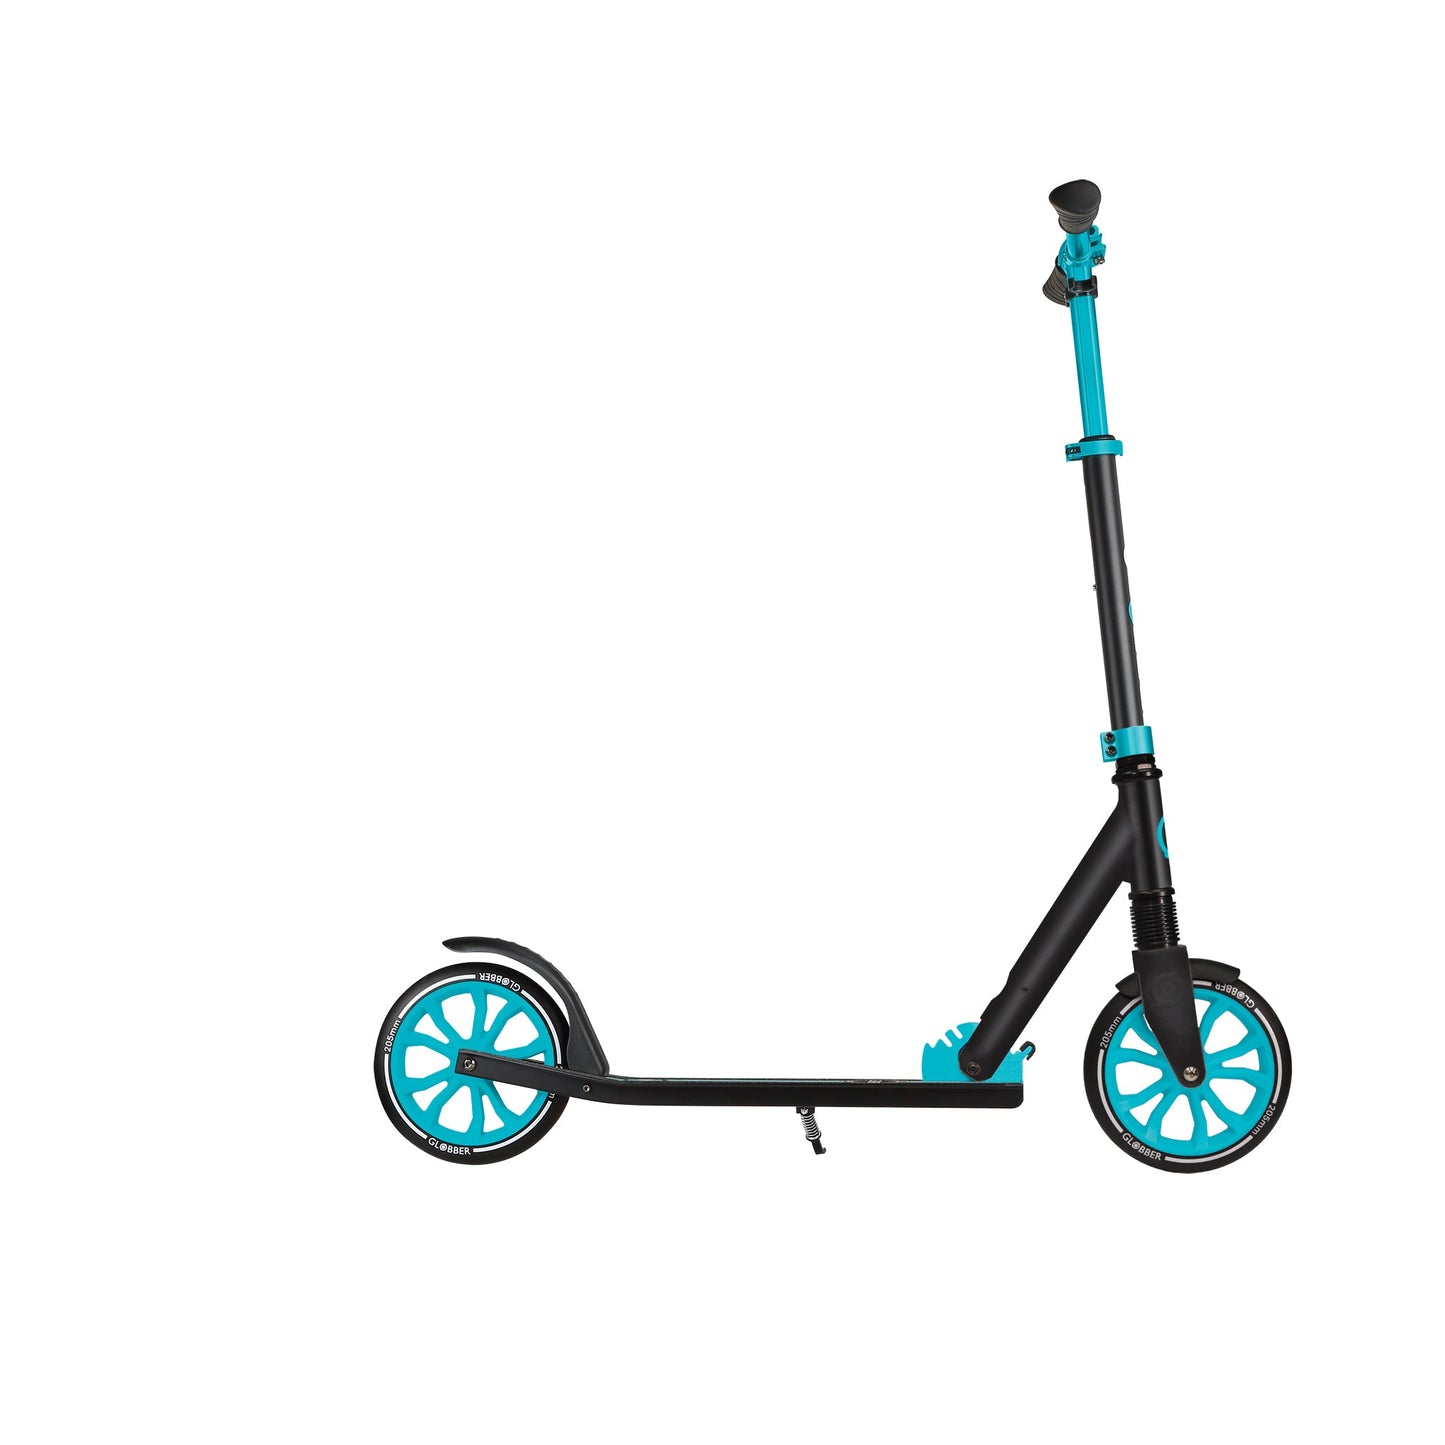 NL 205: Big Wheel Scooter for Kids and Teens - Teal/Black